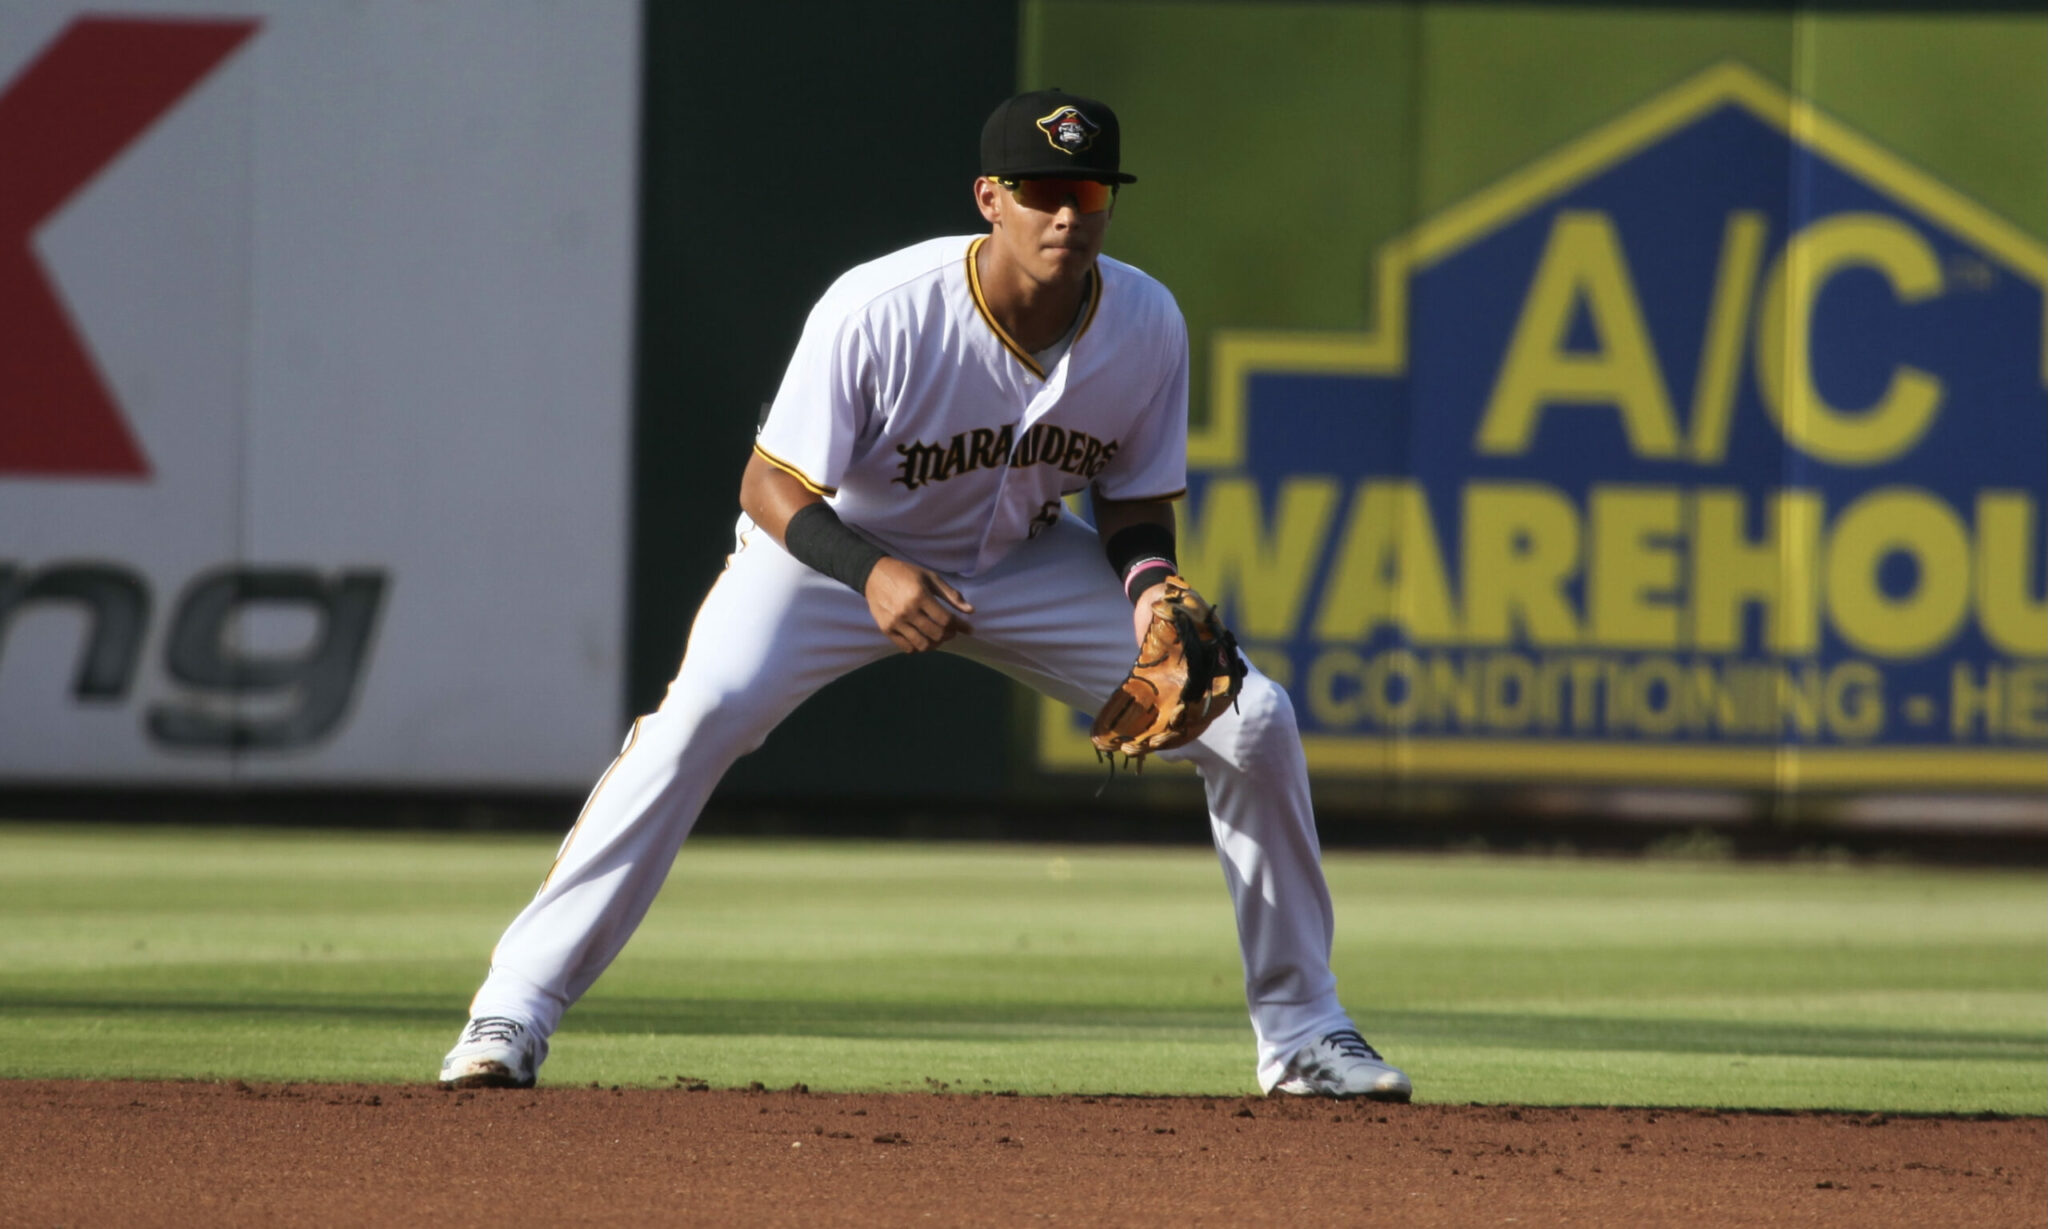 Pirates Prospects Daily: The Dariel Lopez Injury is an Unfortunate Set Back